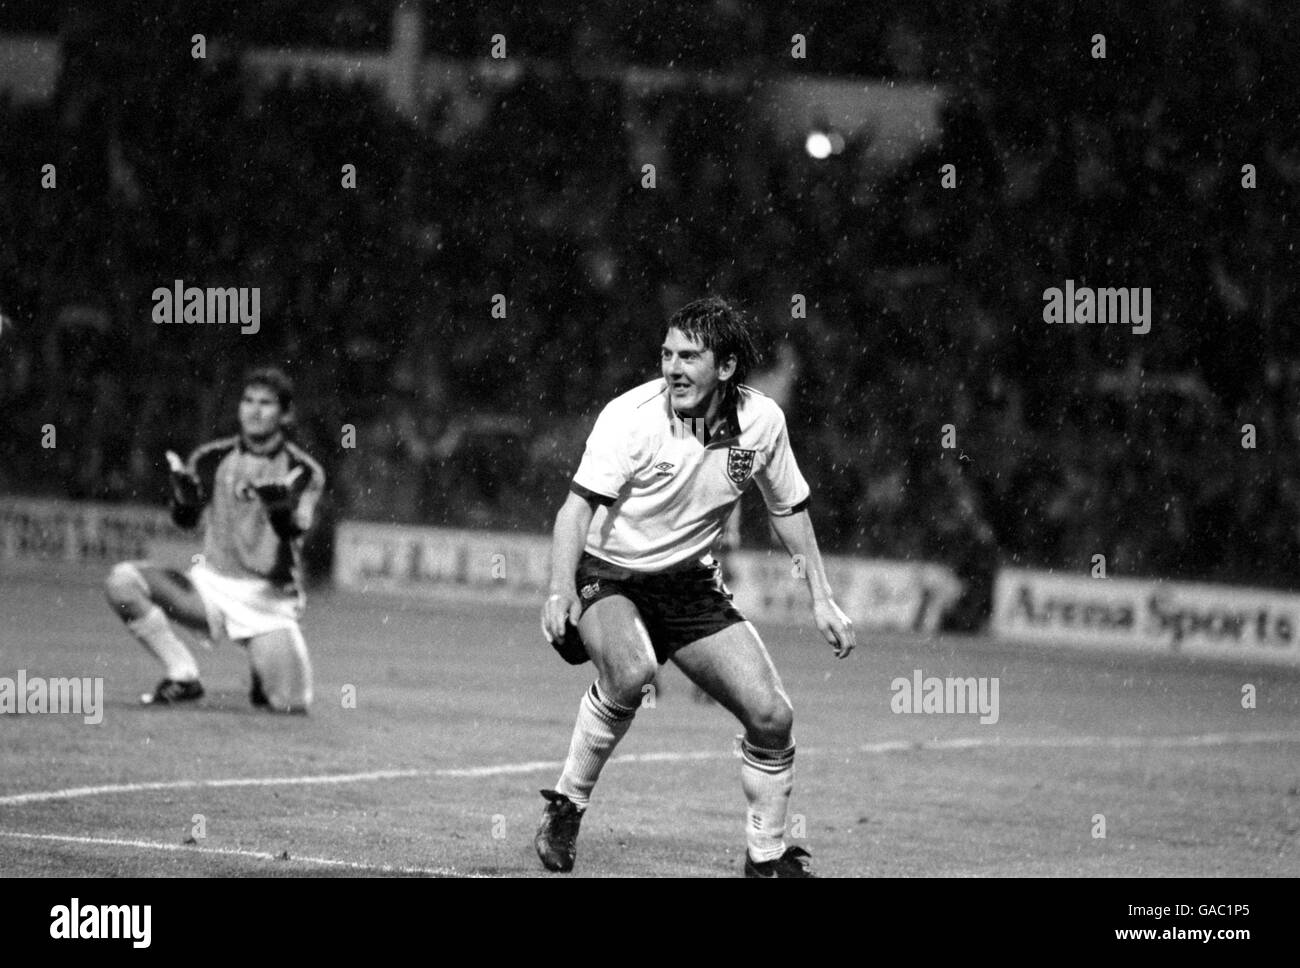 Soccer - European Championship Qualifier - Group Four - England v Turkey. England's Peter Beardsley turns to celebrate after scoring one of his team's eight goals Stock Photo